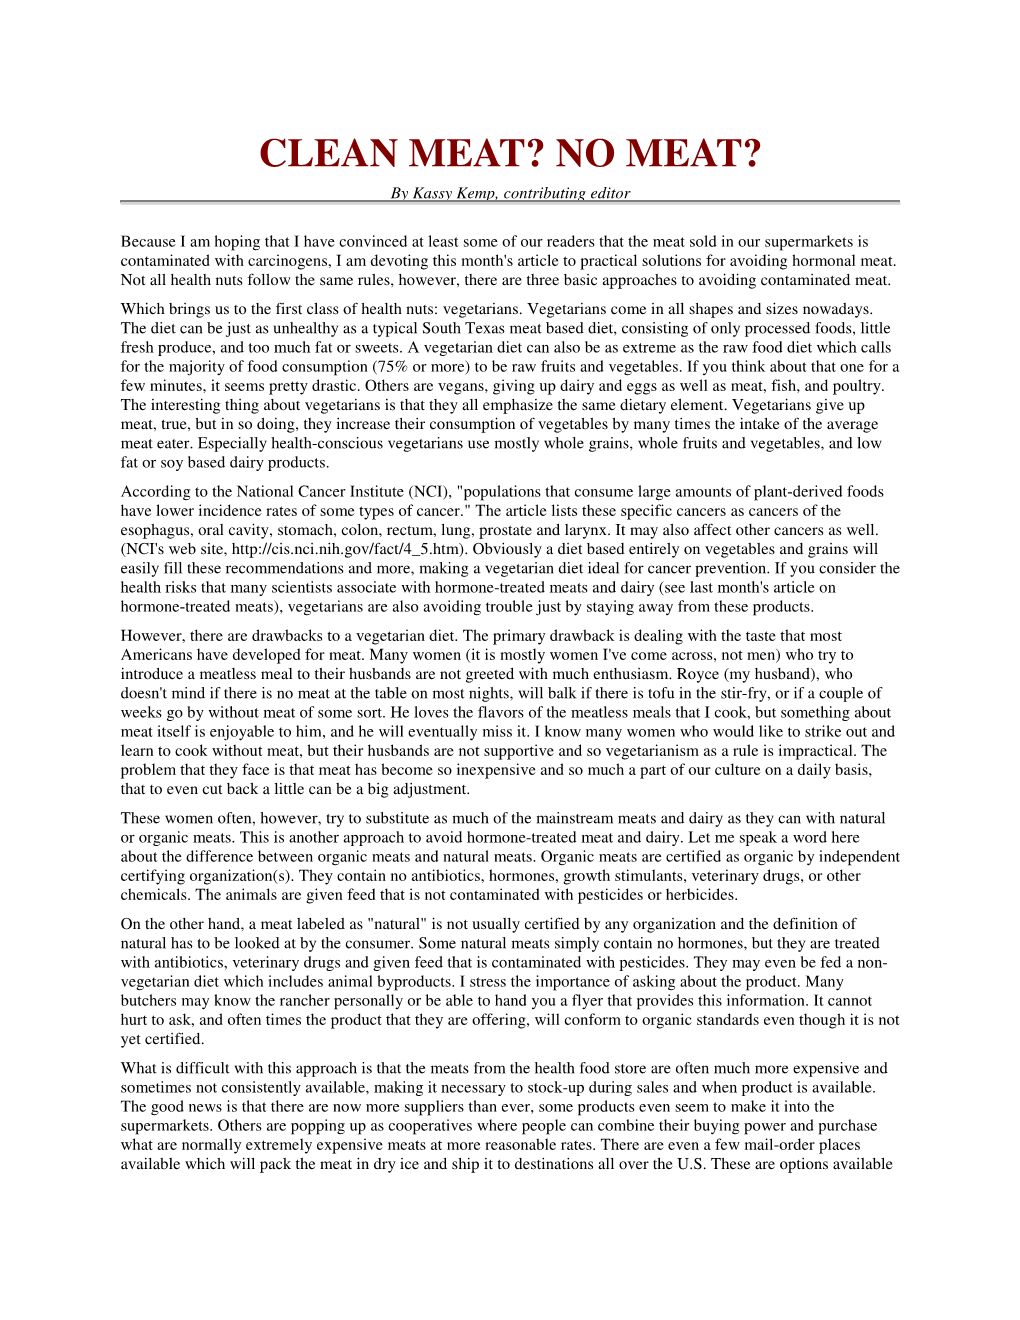 CLEAN MEAT? NO MEAT? by Kassy Kemp, Contributing Editor